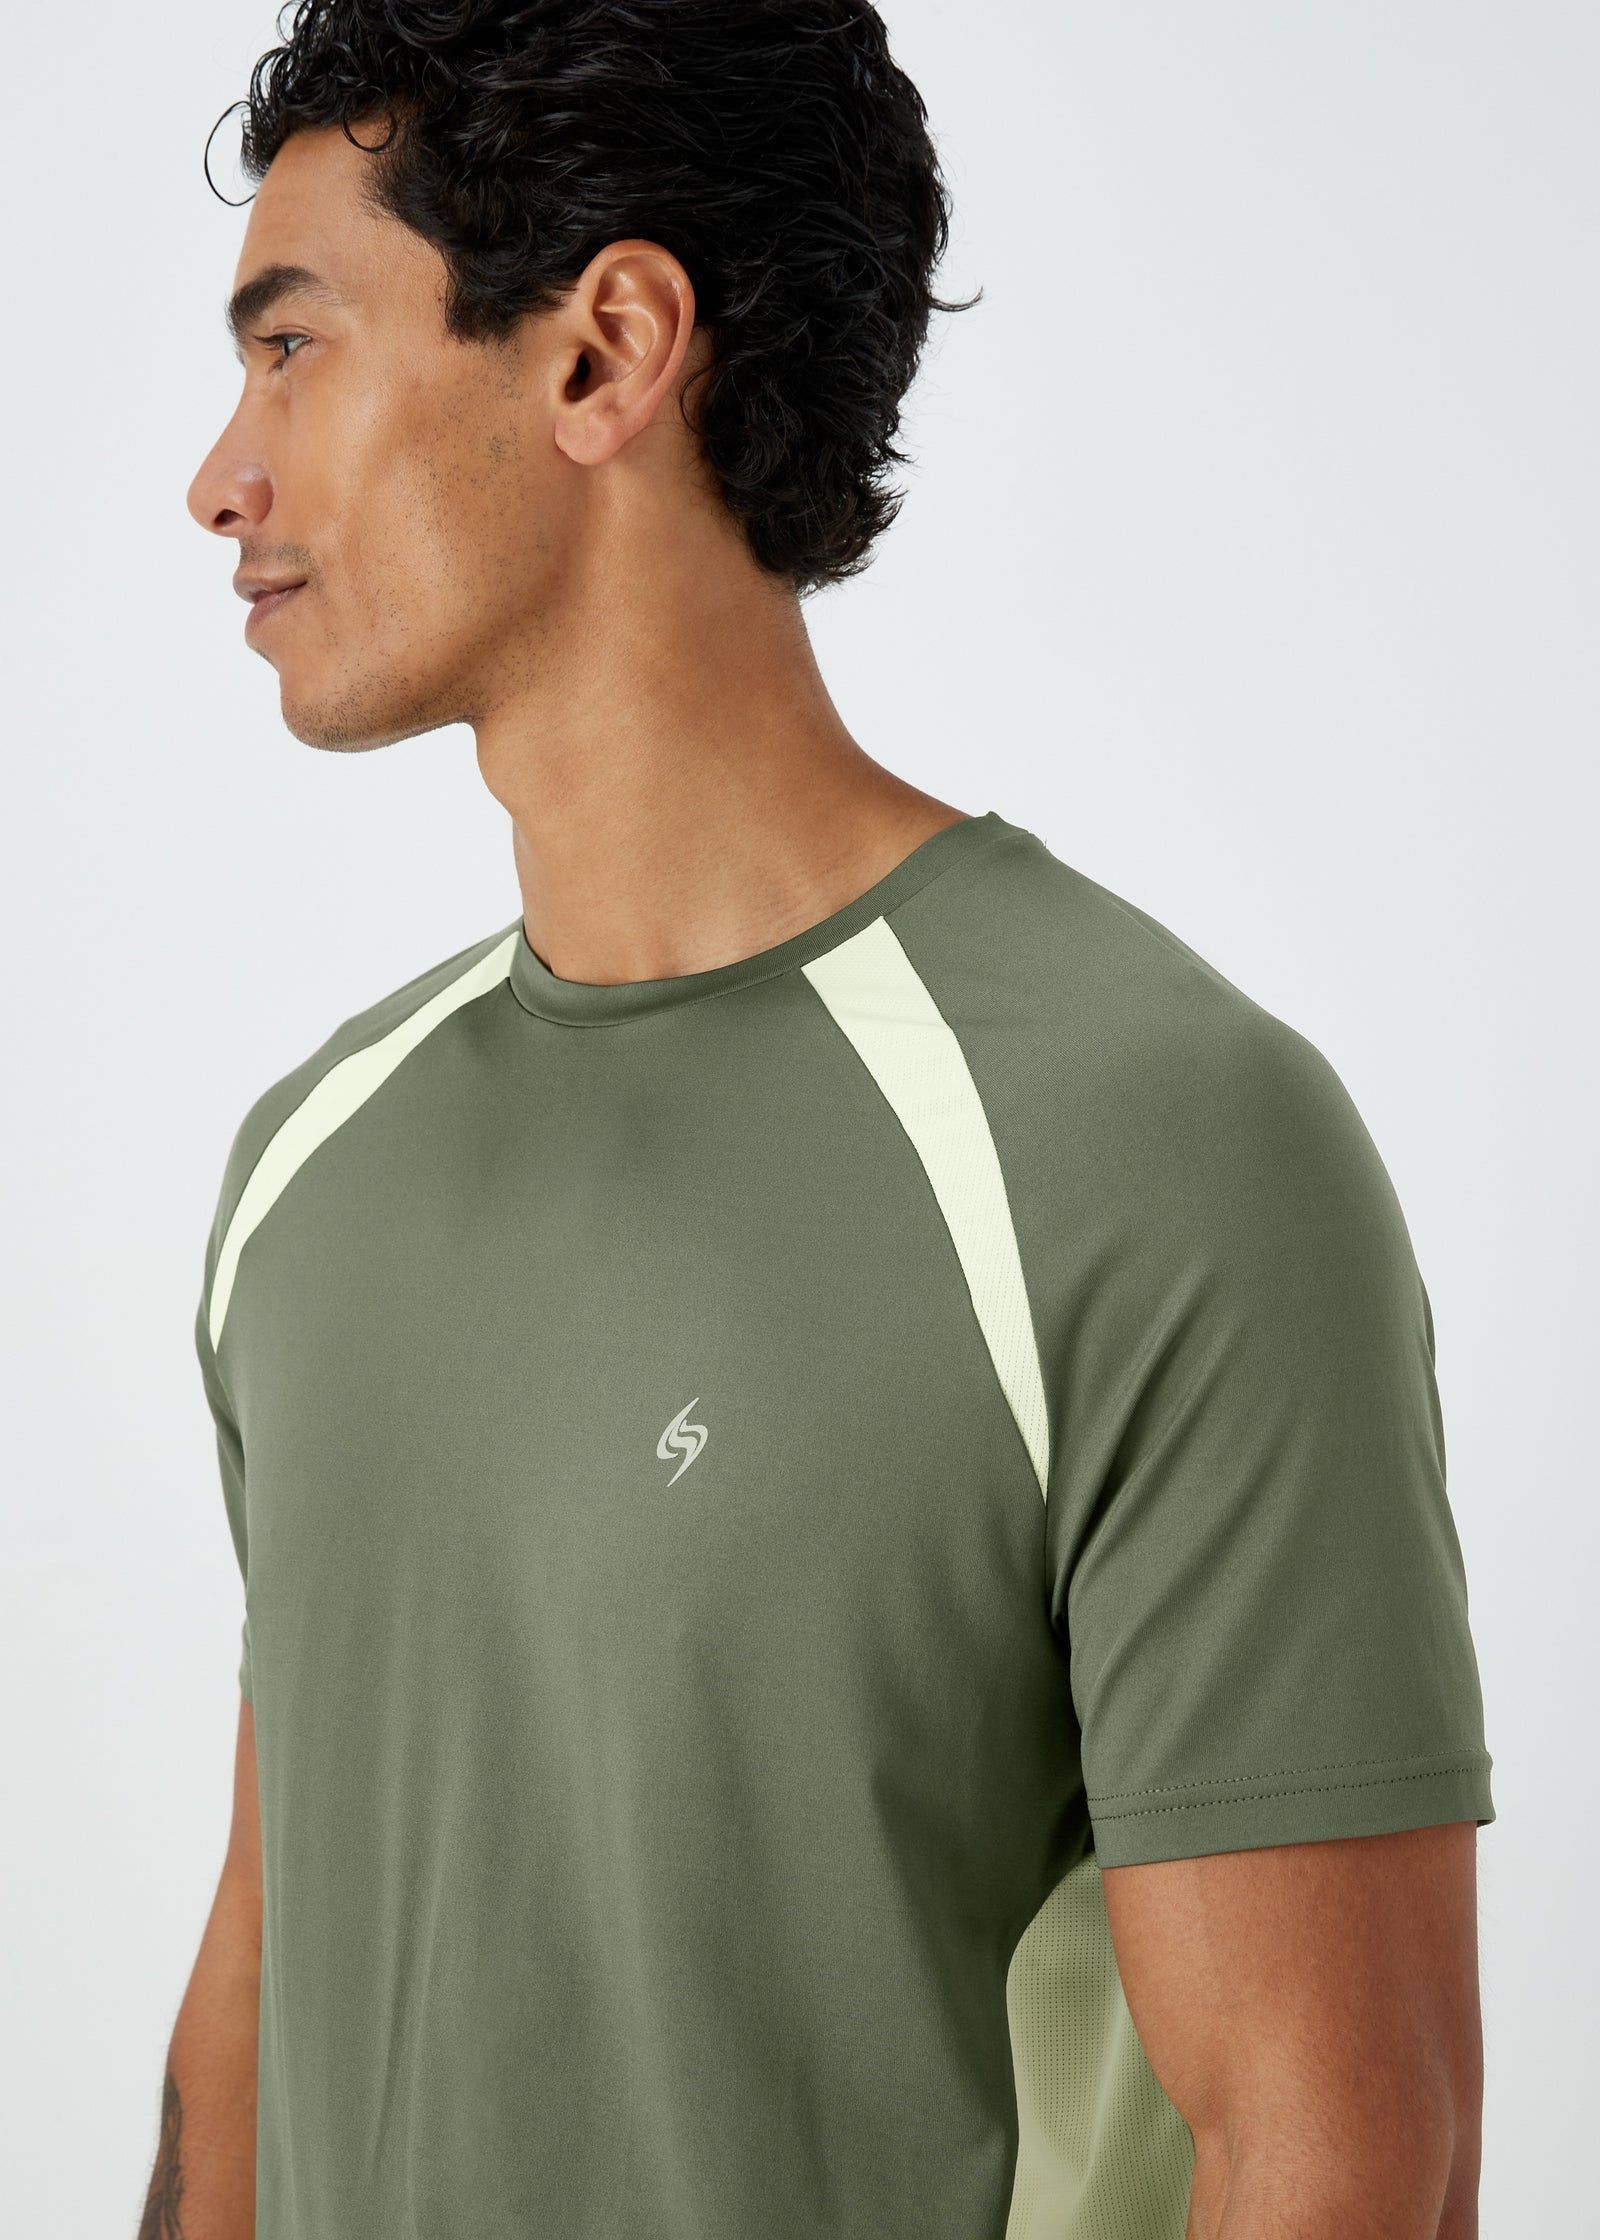 Buy Souluxe Khaki Colour Panel Sports T-Shirt Online in UAE from Matalan